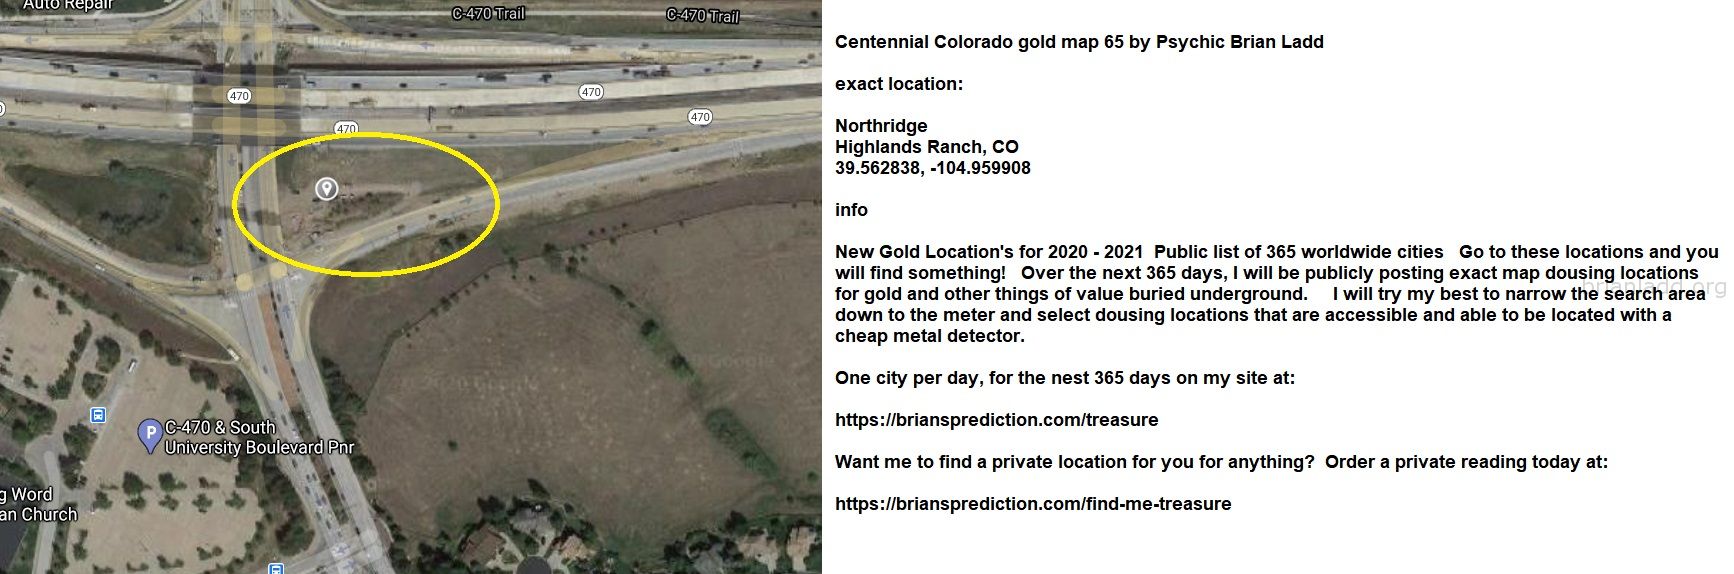 Centennial Colorado Gold Map 65 By Psychic Brian Ladd - Centennial Colorado Gold Map 65 By Psychic Brian Ladd  Exact Loc...
Centennial Colorado Gold Map 65 By Psychic Brian Ladd  Exact Location:  Northridge  Highlands Ranch, Co  39.562838, -104.959908  Info  New Gold Location'S For 2020 - 2021  Public List Of 365 Worldwide Cities  Go To These Locations And You Will Find Something!  Over The Next 365 Days, I Will Be Publicly Posting Exact Map Dousing Locations For Gold And Other Things Of Value Buried Underground.  I Will Try My Best To Narrow The Search Area Down To The Meter And Select Dousing Locations That Are Accessible And Able To Be Located With A Cheap Metal Detector.  One City Per Day, For The Nest 365 Days On My Site At:   https://briansprediction.com/Treasure  Want Me To Find A Private Location For You For Anything?  Order A Private Reading Today At:   https://briansprediction.com/Find-Me-Treasure
